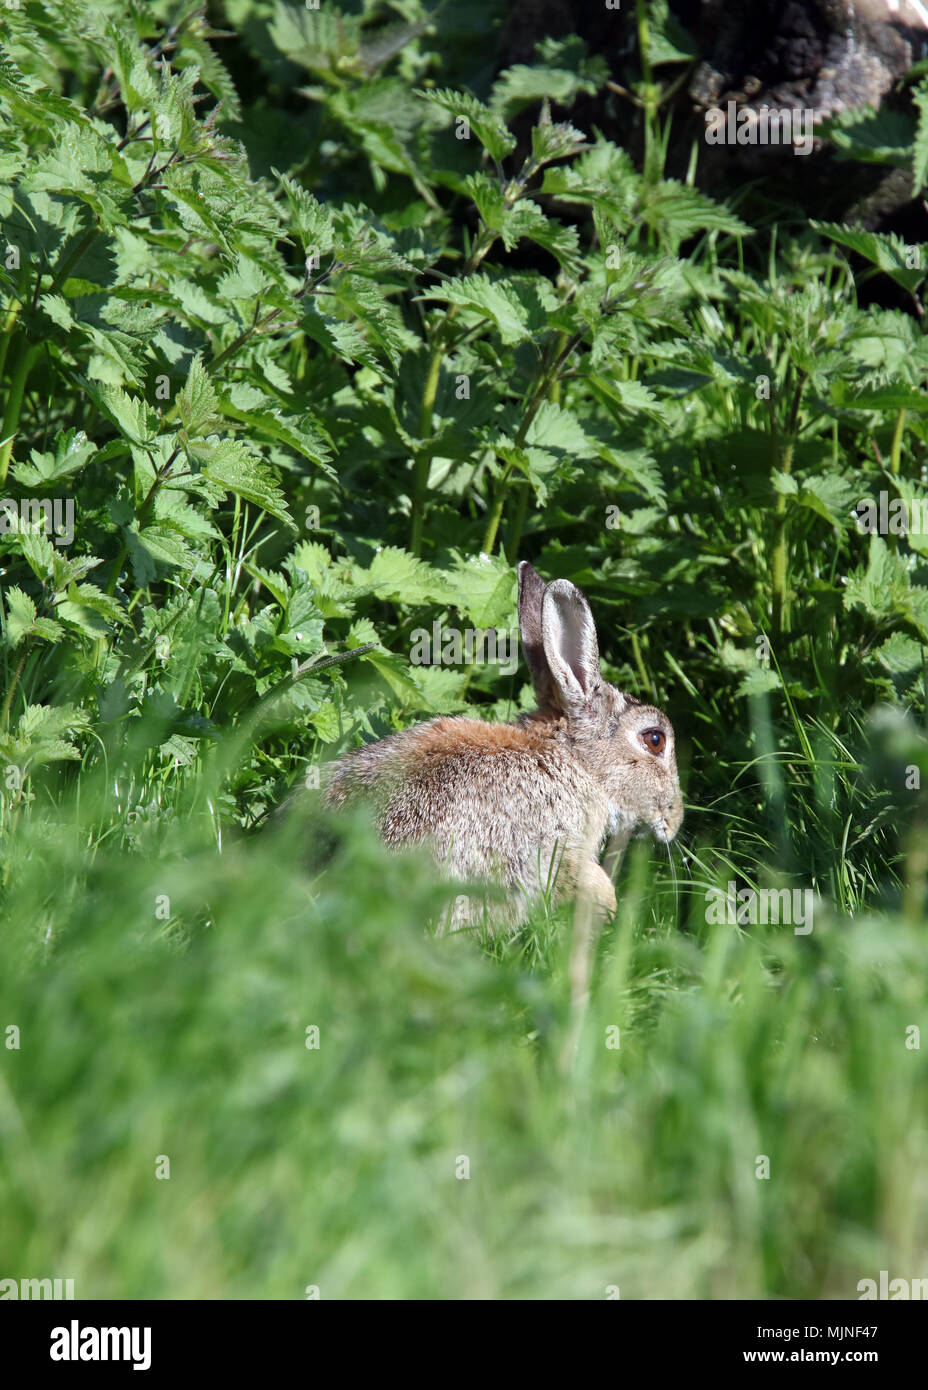 May 2018 - Wild rabbits in Rural Somerset Stock Photo